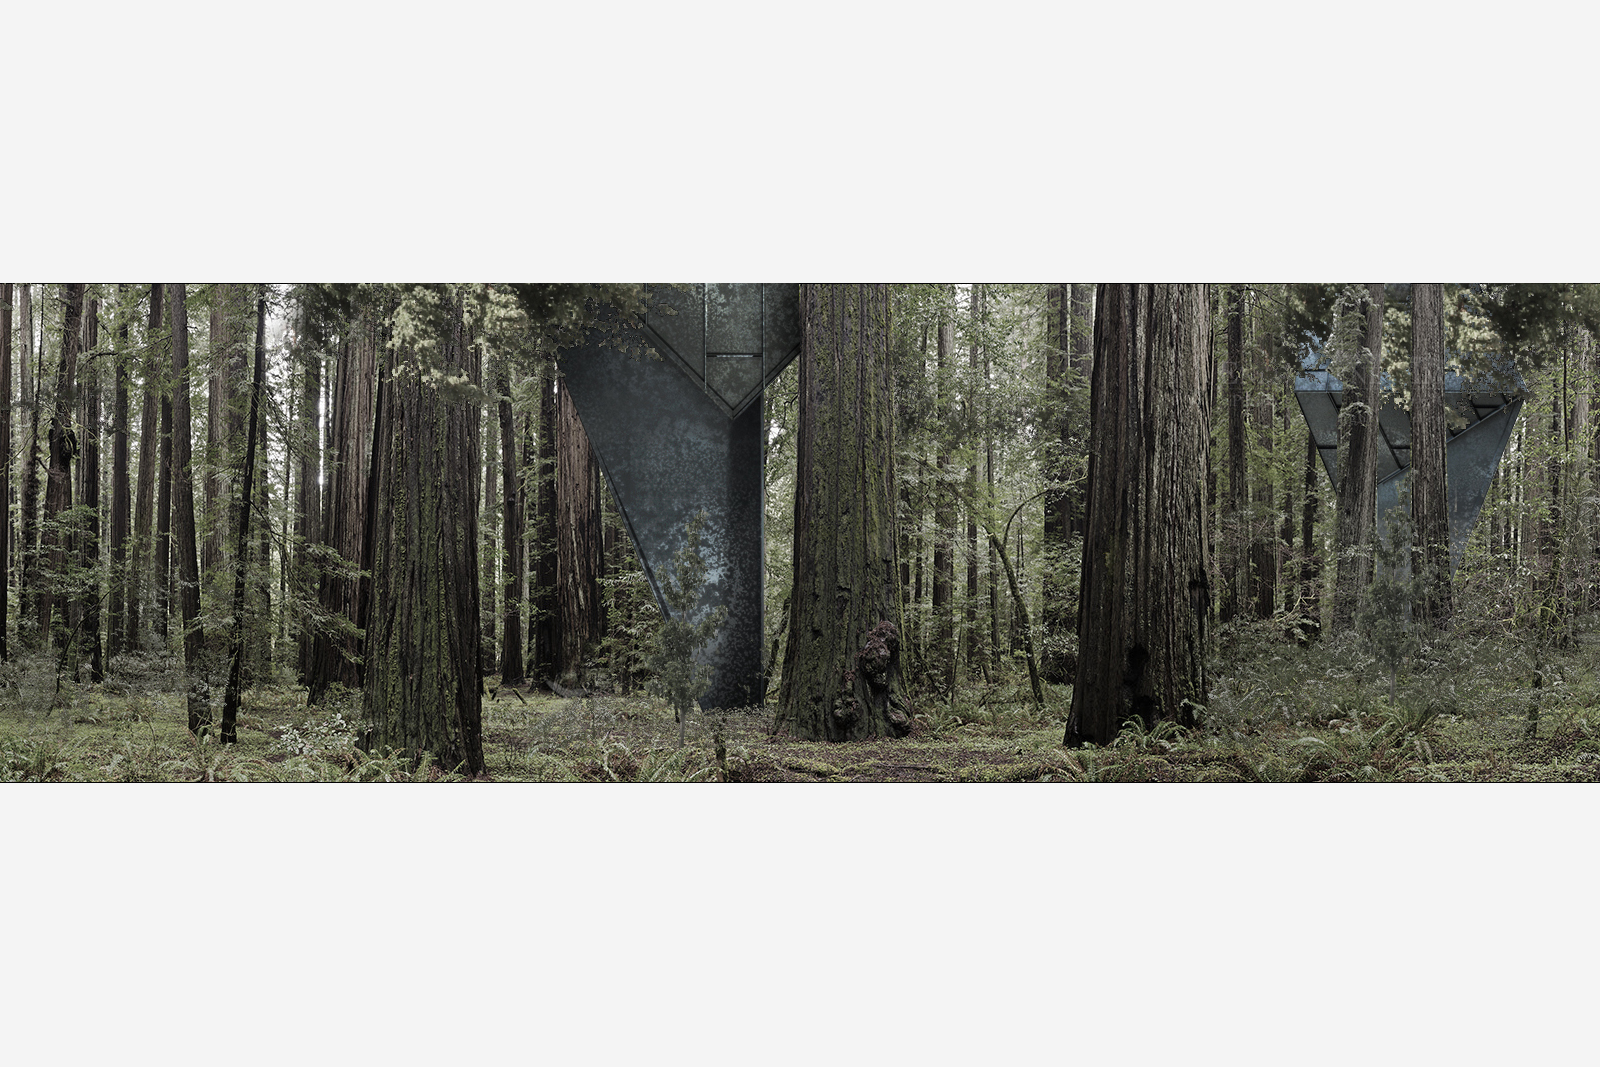 Redwood Grove panorama in Humboldt Redwoods State Park, near Weott, Humboldt County, California